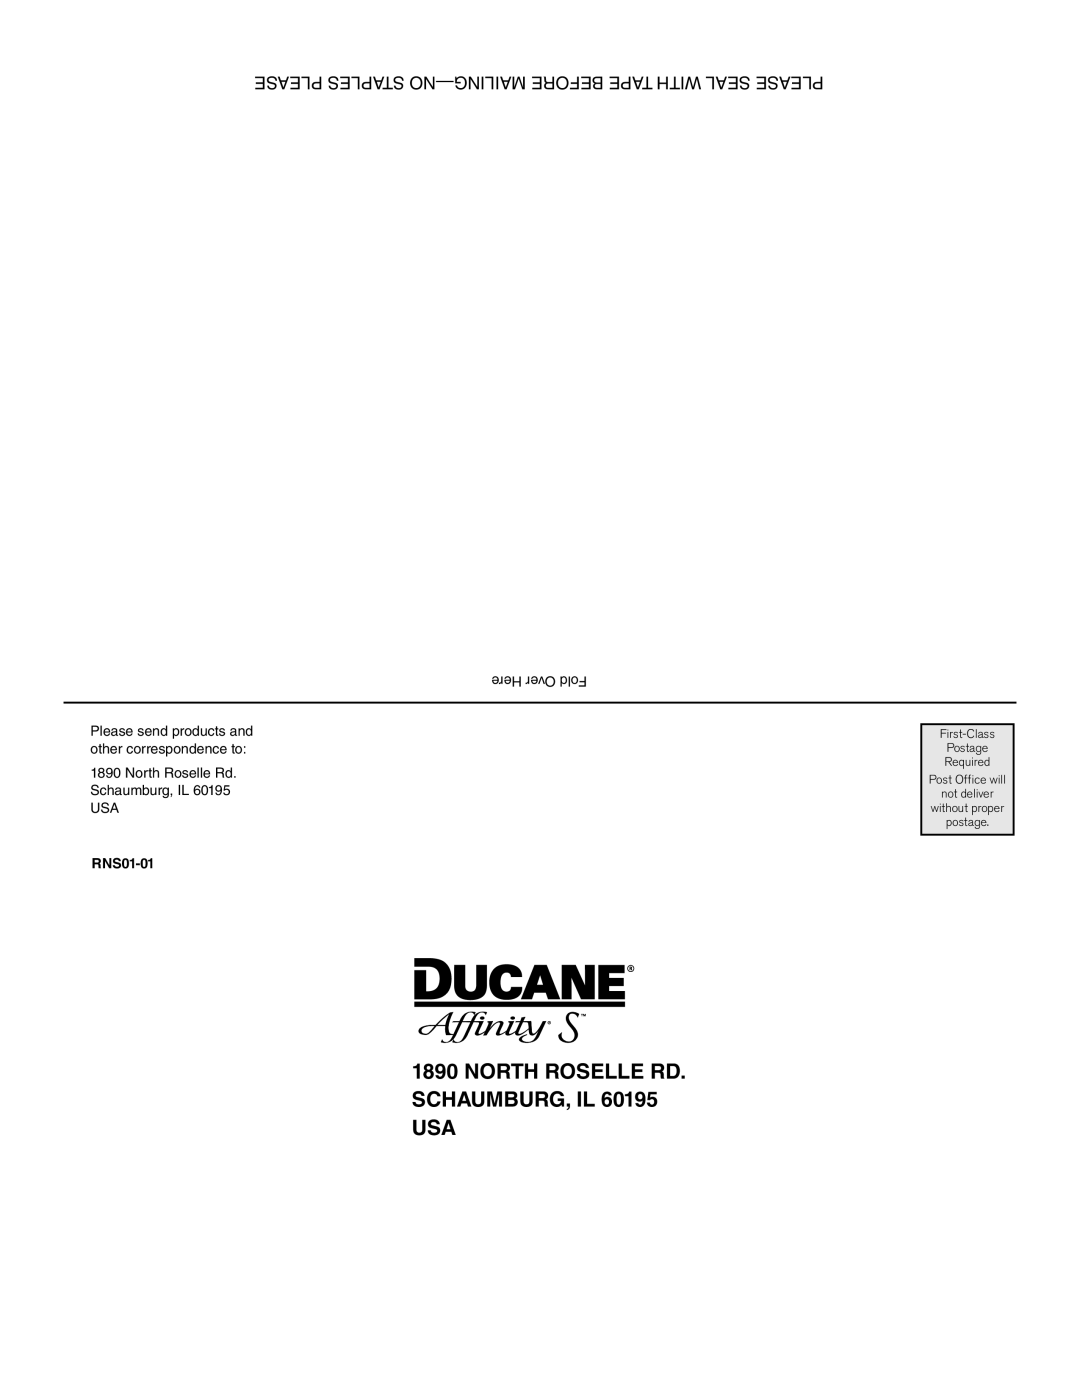 Ducane 3200, 5200 NORTH ROSELLE RD. SCHAUMBURG, IL 60195 USA, Please Staples No-Mailing Before Tape With Seal Please 